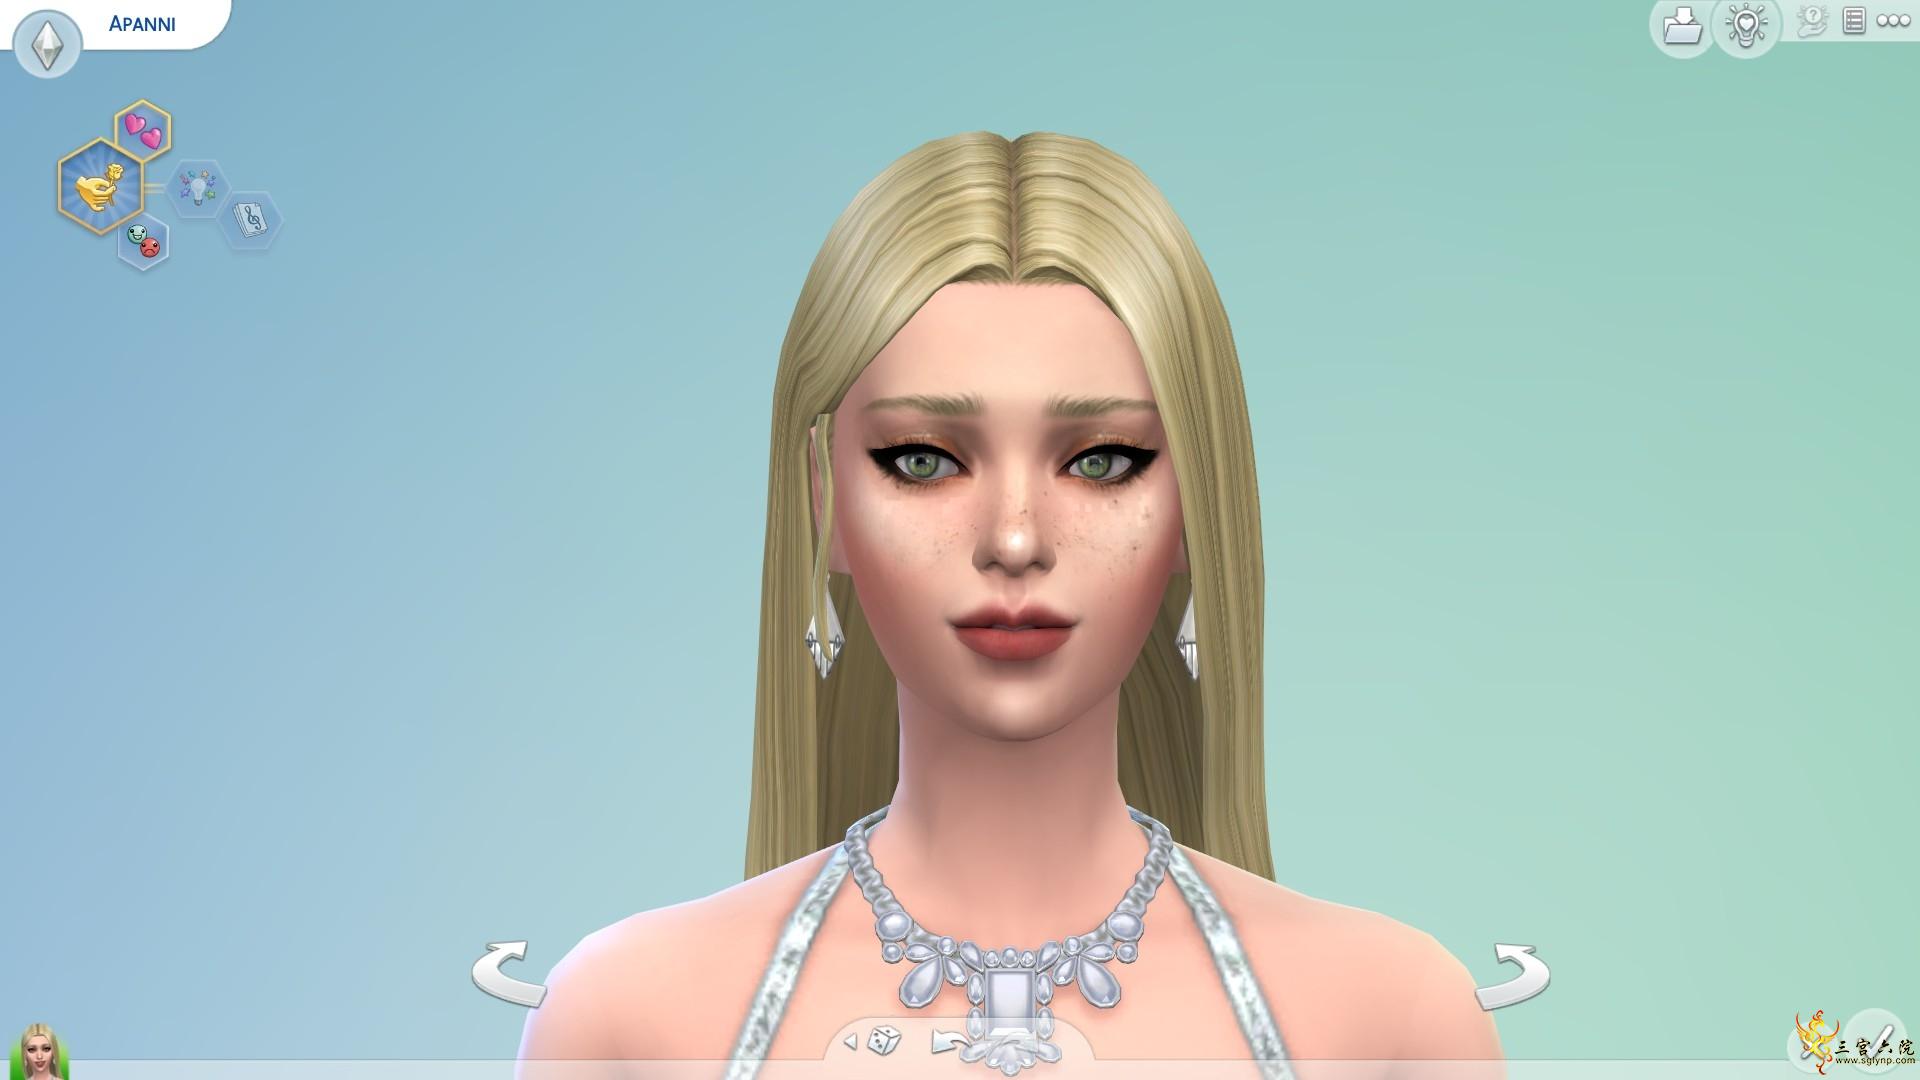 sims4_A_panini.png